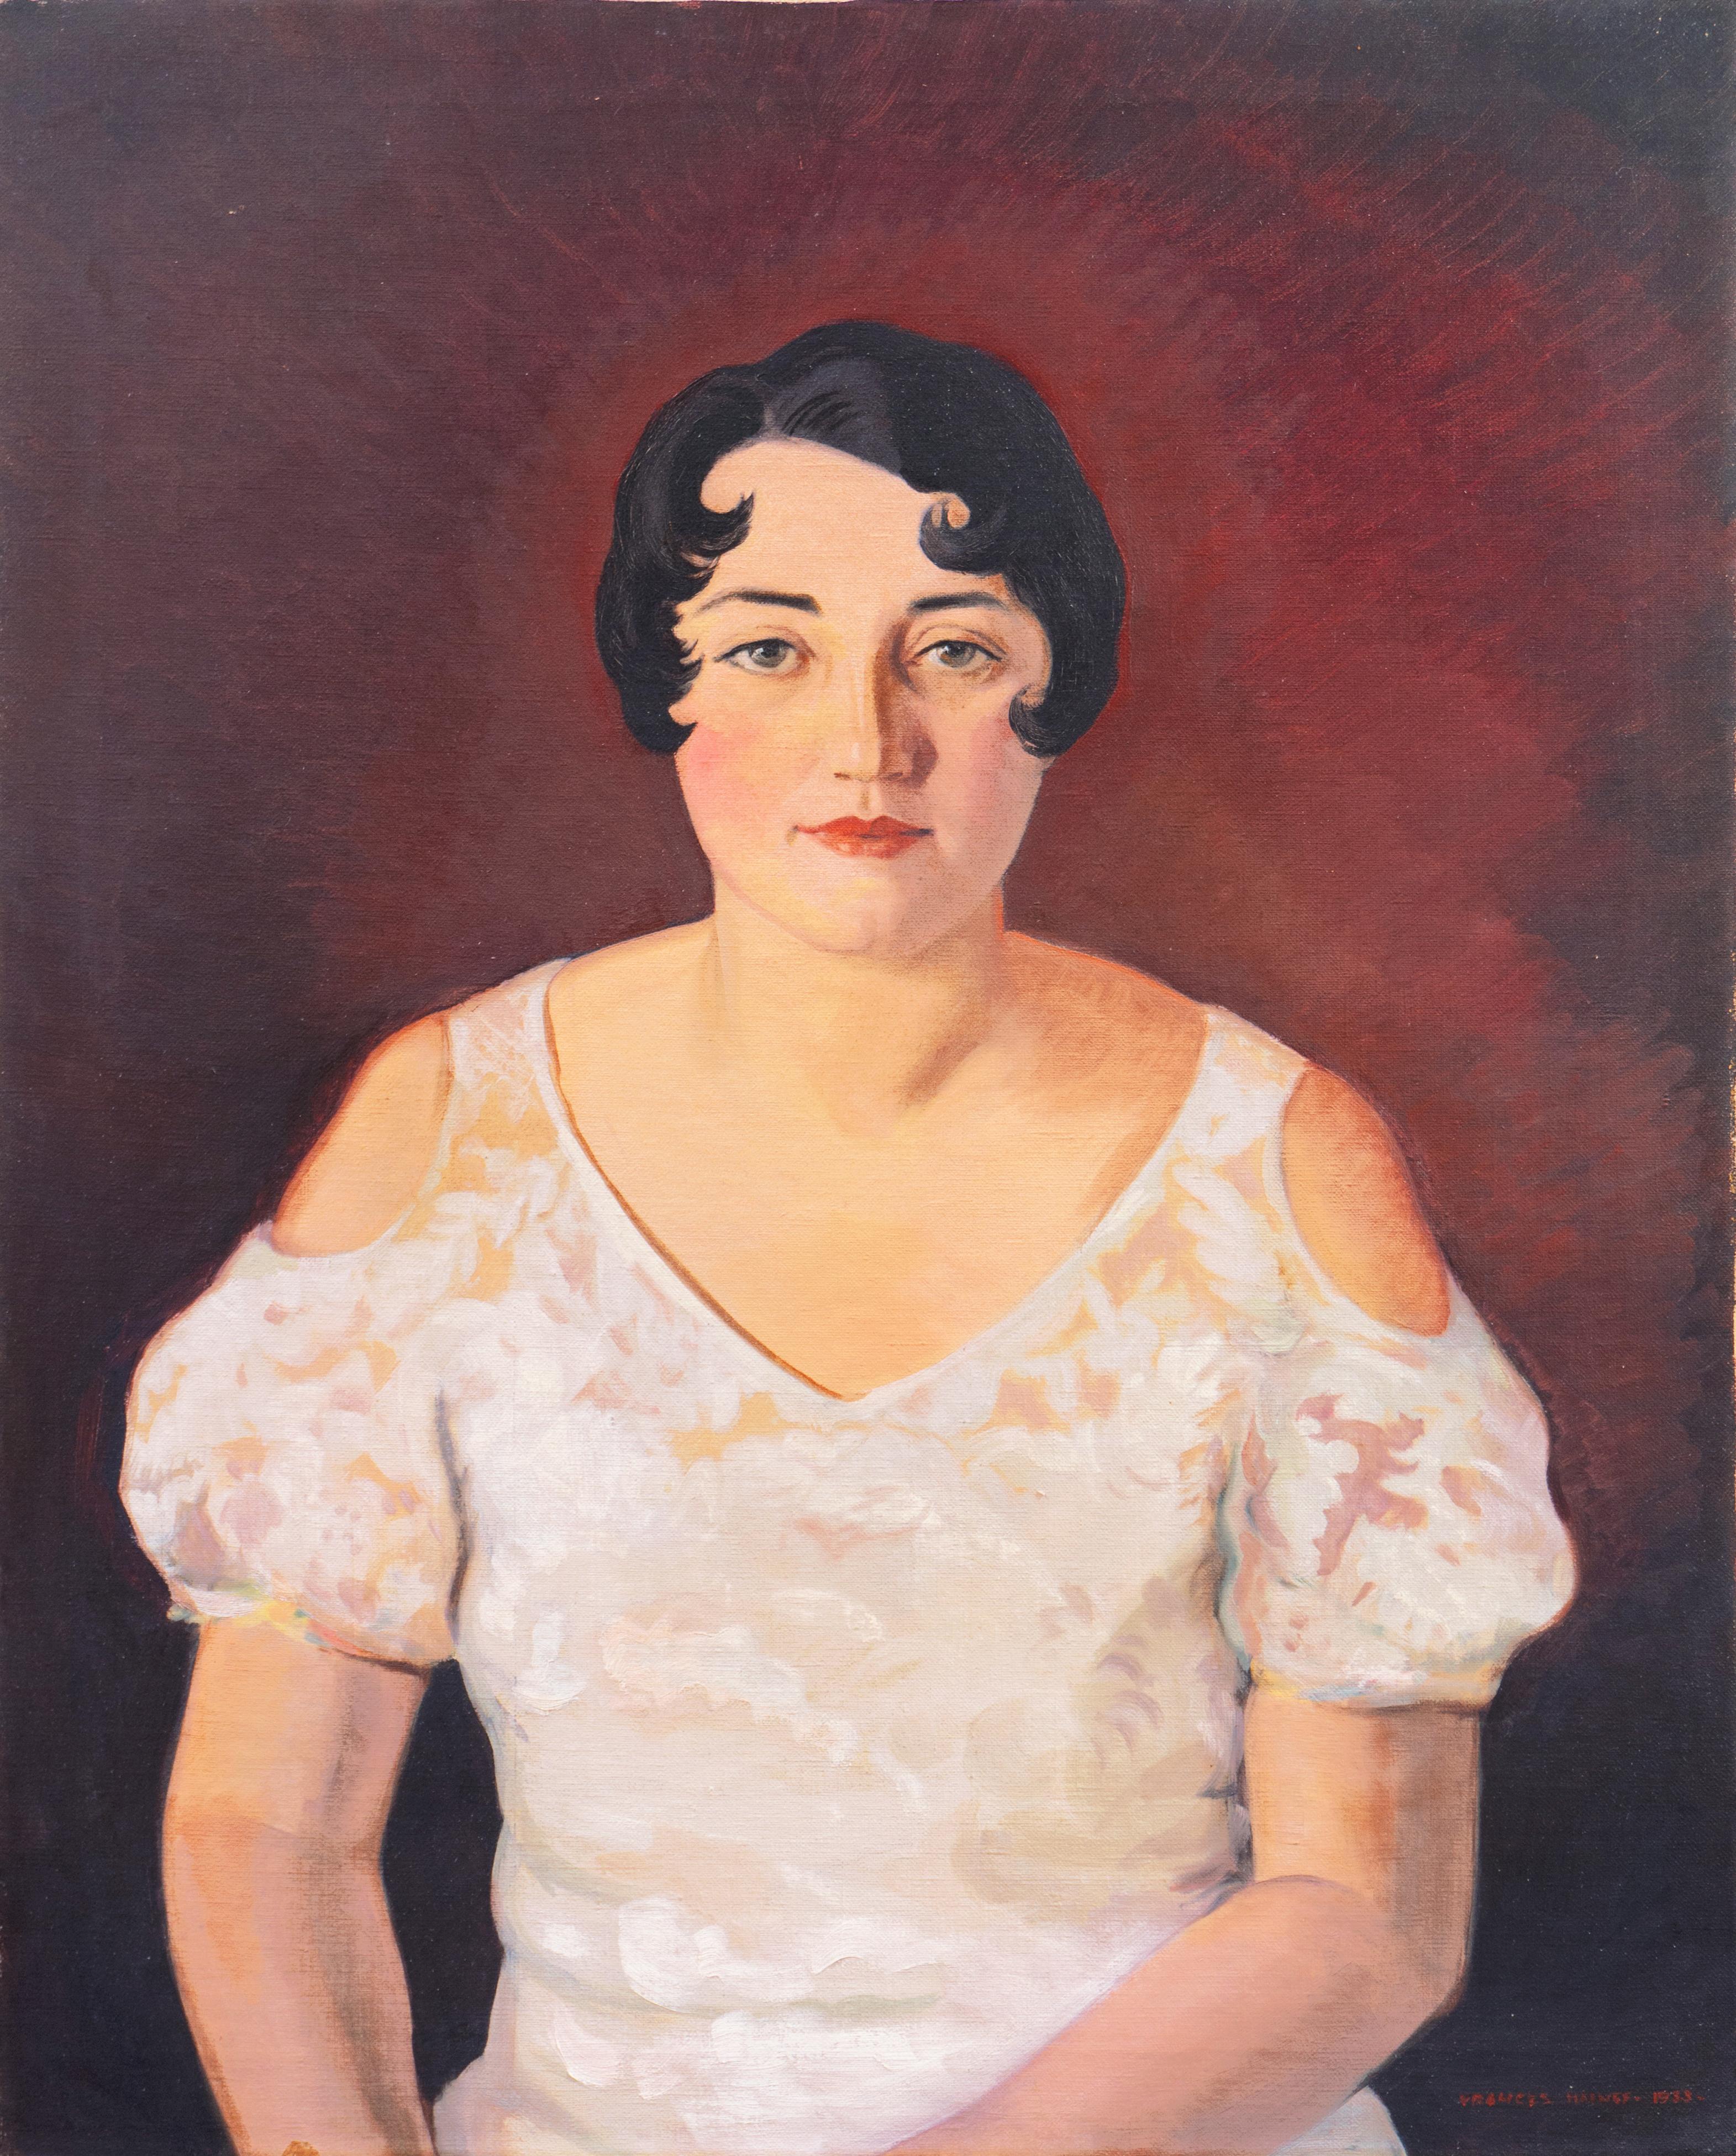 Frances Haines Sweeney Portrait Painting - 'Portrait of a Woman' Early California Woman, Art Institute of Chicago, Art Deco